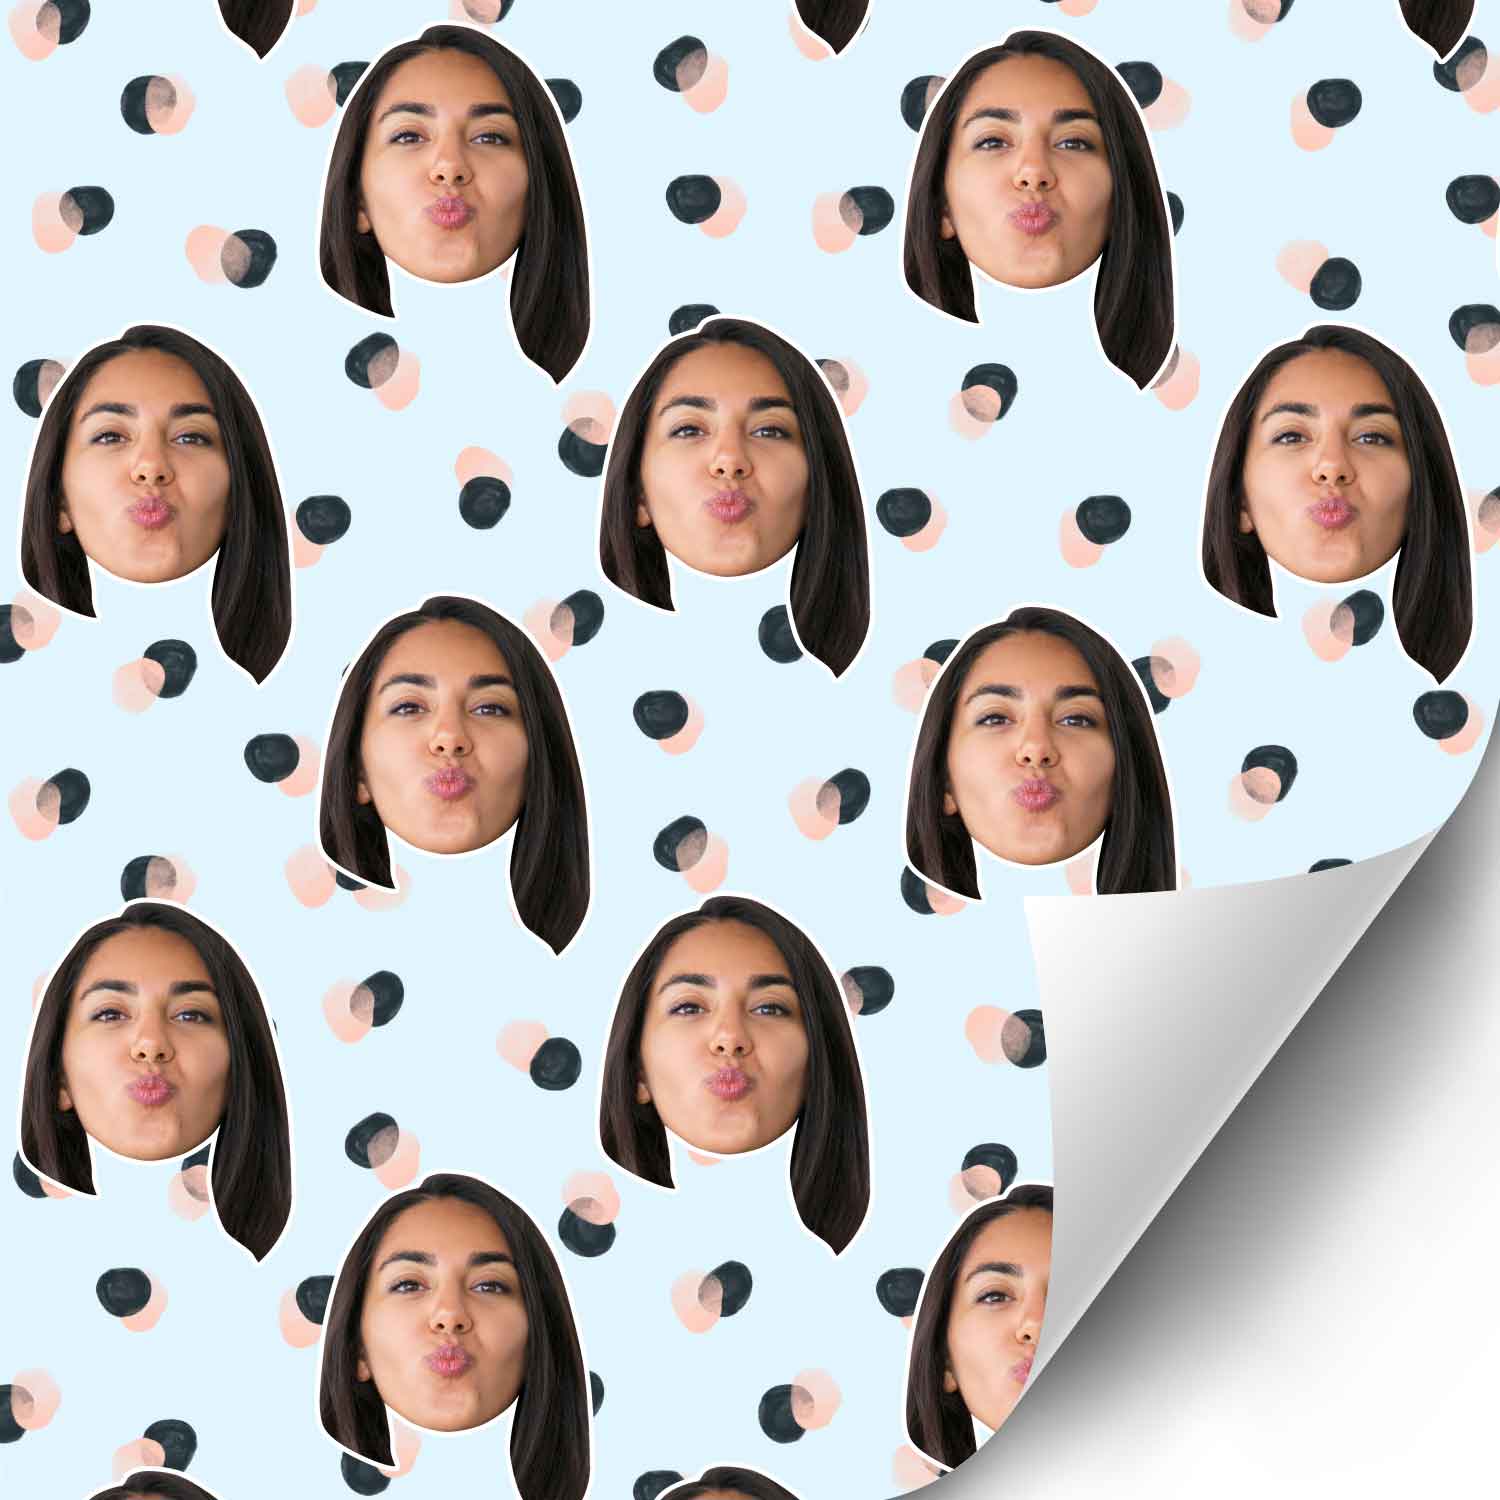 Your Face Spots Wrapping Paper